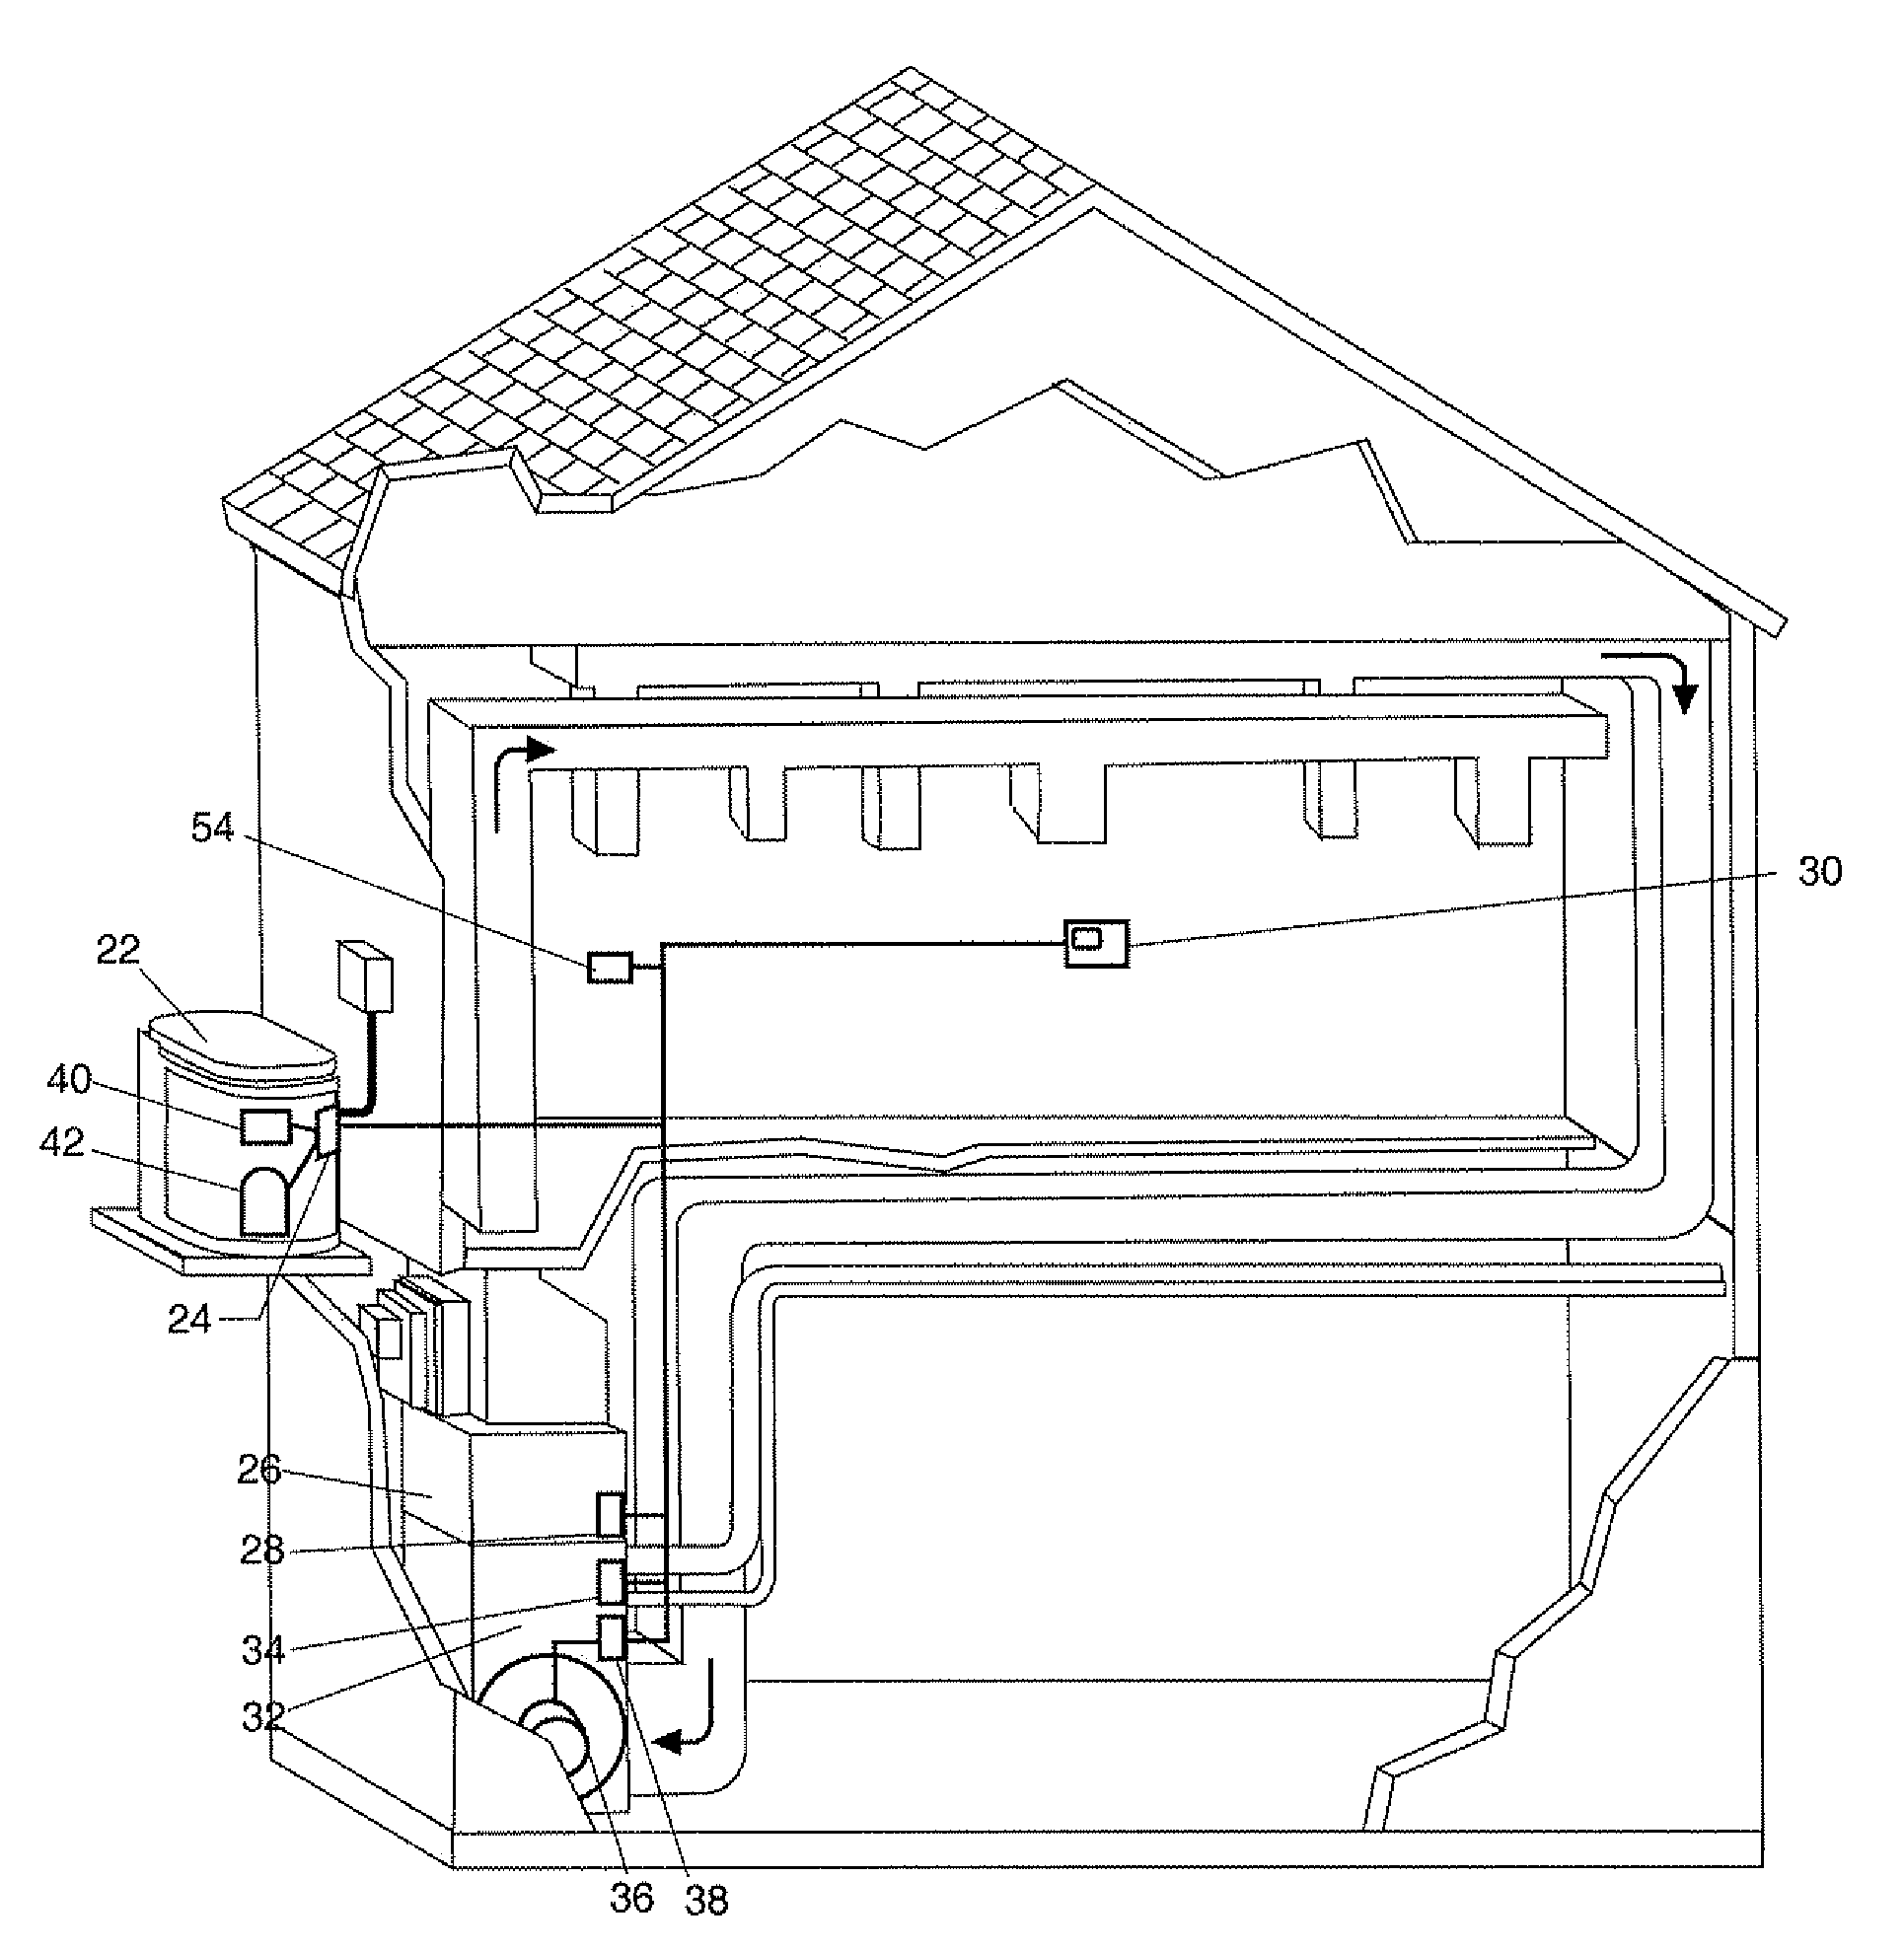 Control system protocol for an HVAC system